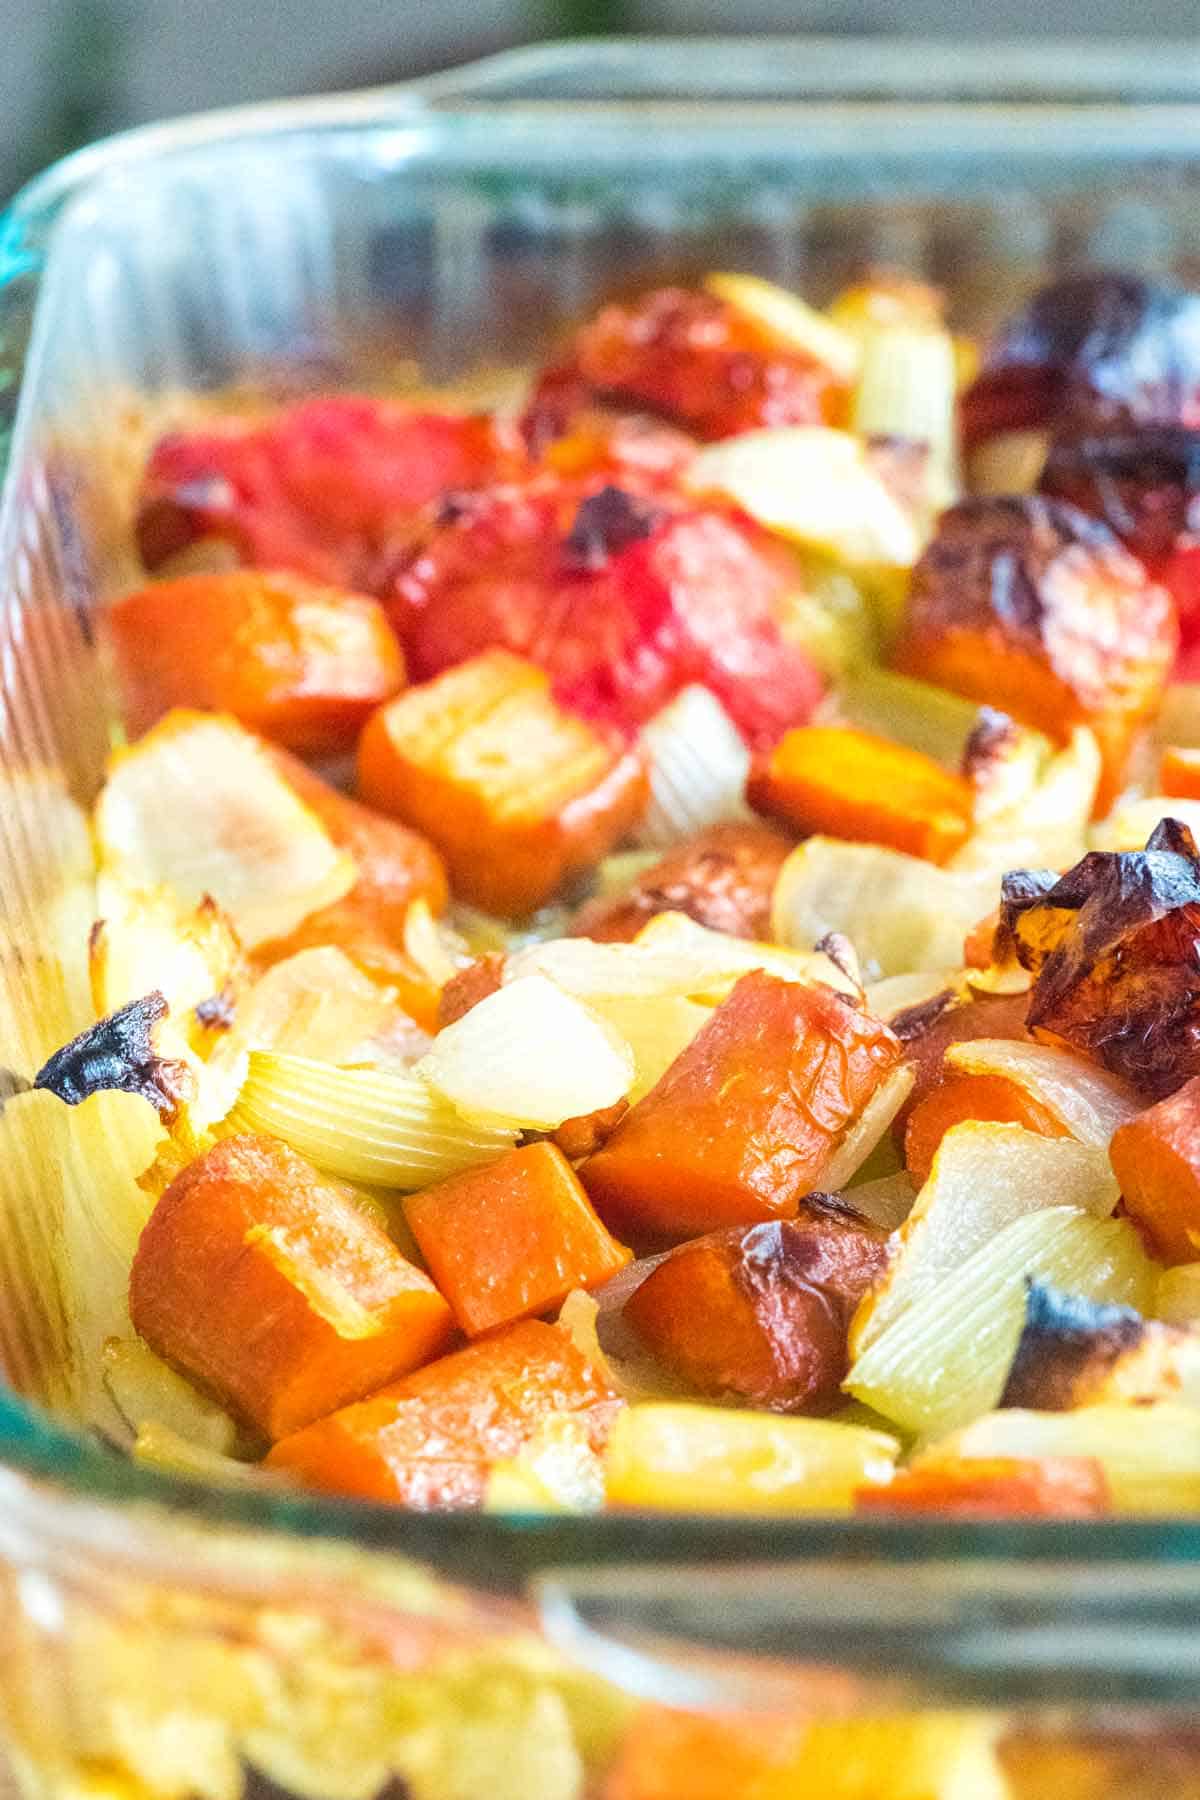 Roasted vegetables for the best vegetable broth.